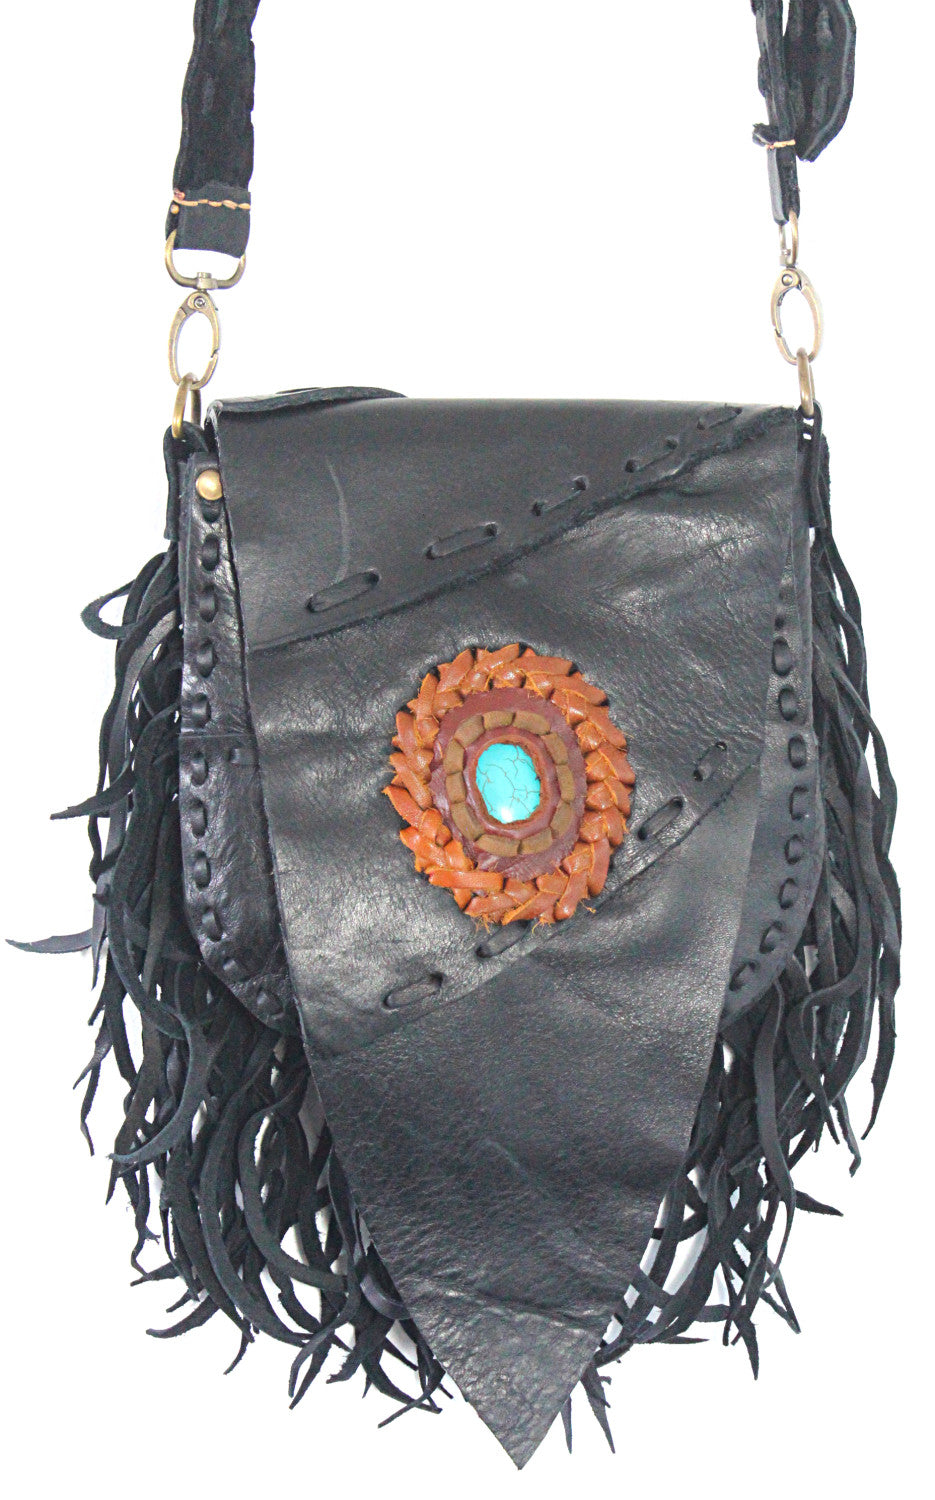 Handmade genuine leather bohemian saddle bag with fringe and stone accent - Atlas Goods